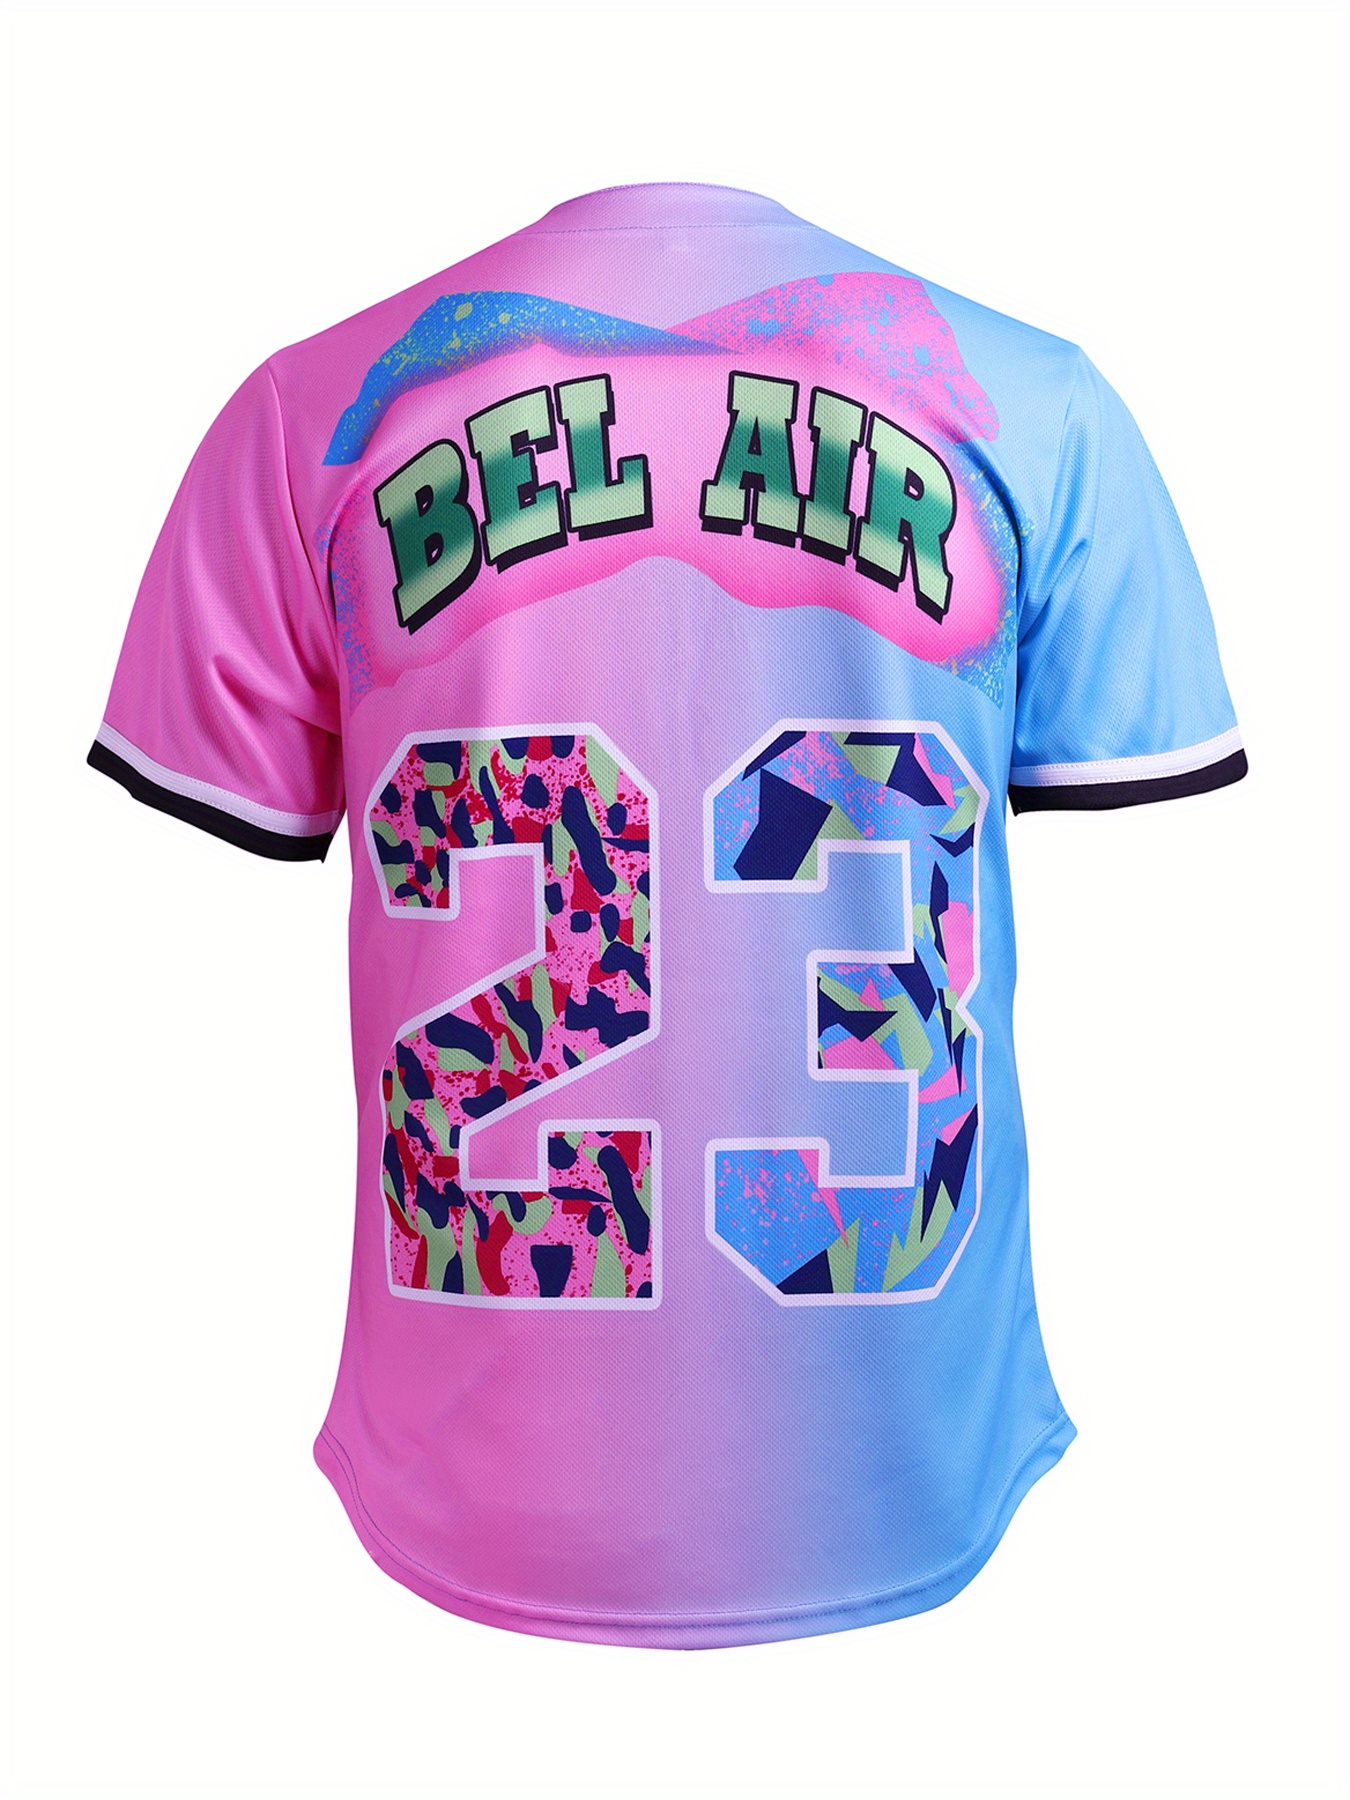 Temu Men's Bel Air #23 Baseball Jersey, 90's City Theme Party Clothing, Hip Hop Color Block Button Up Short Sleeve Shirt Suitable for Birthday Parties